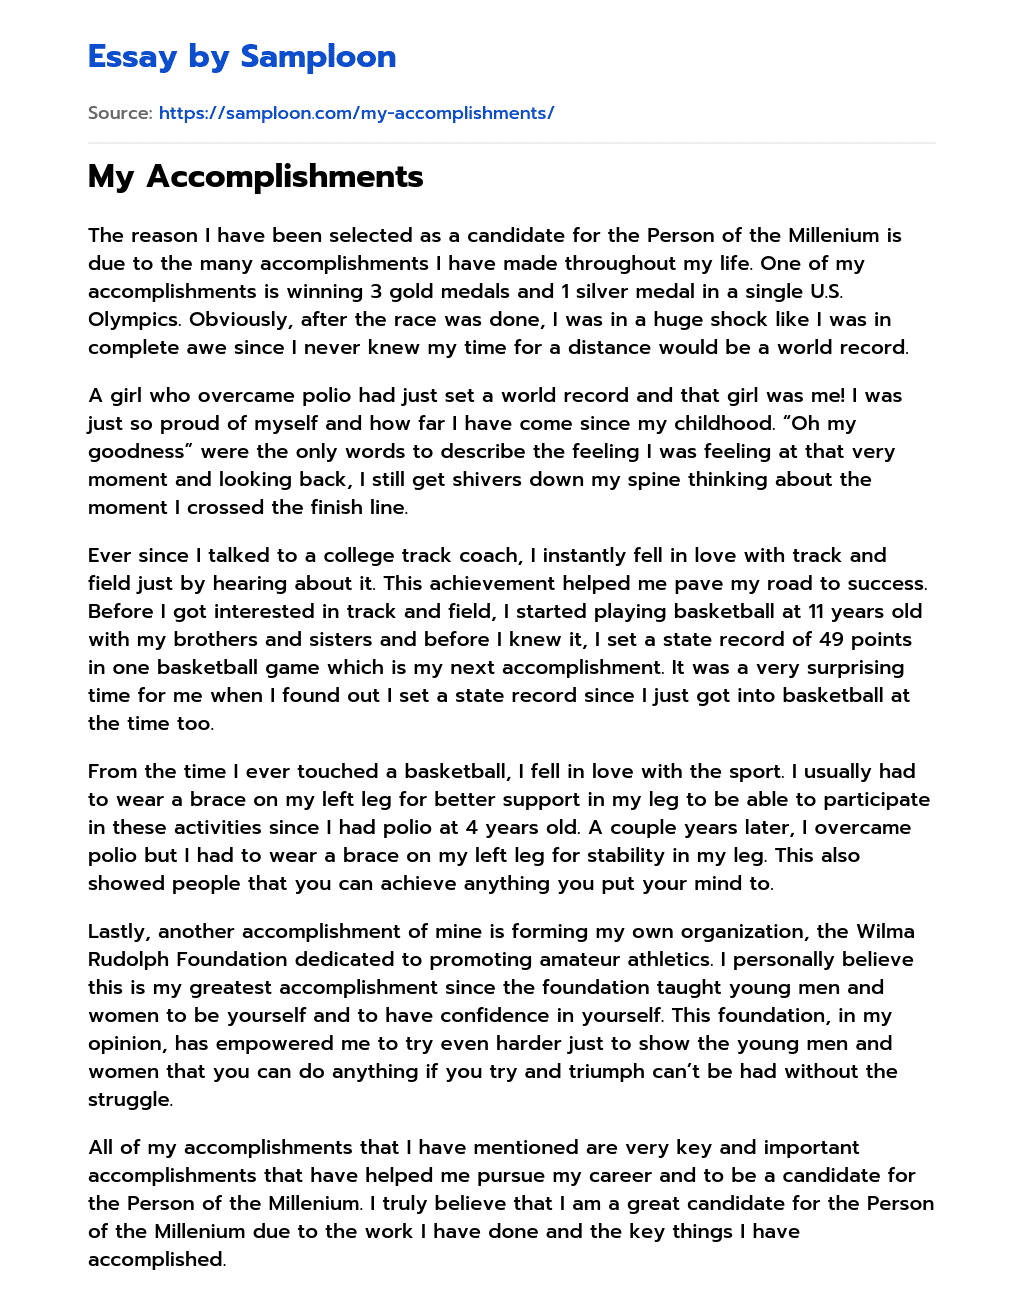 sample essay about accomplishments